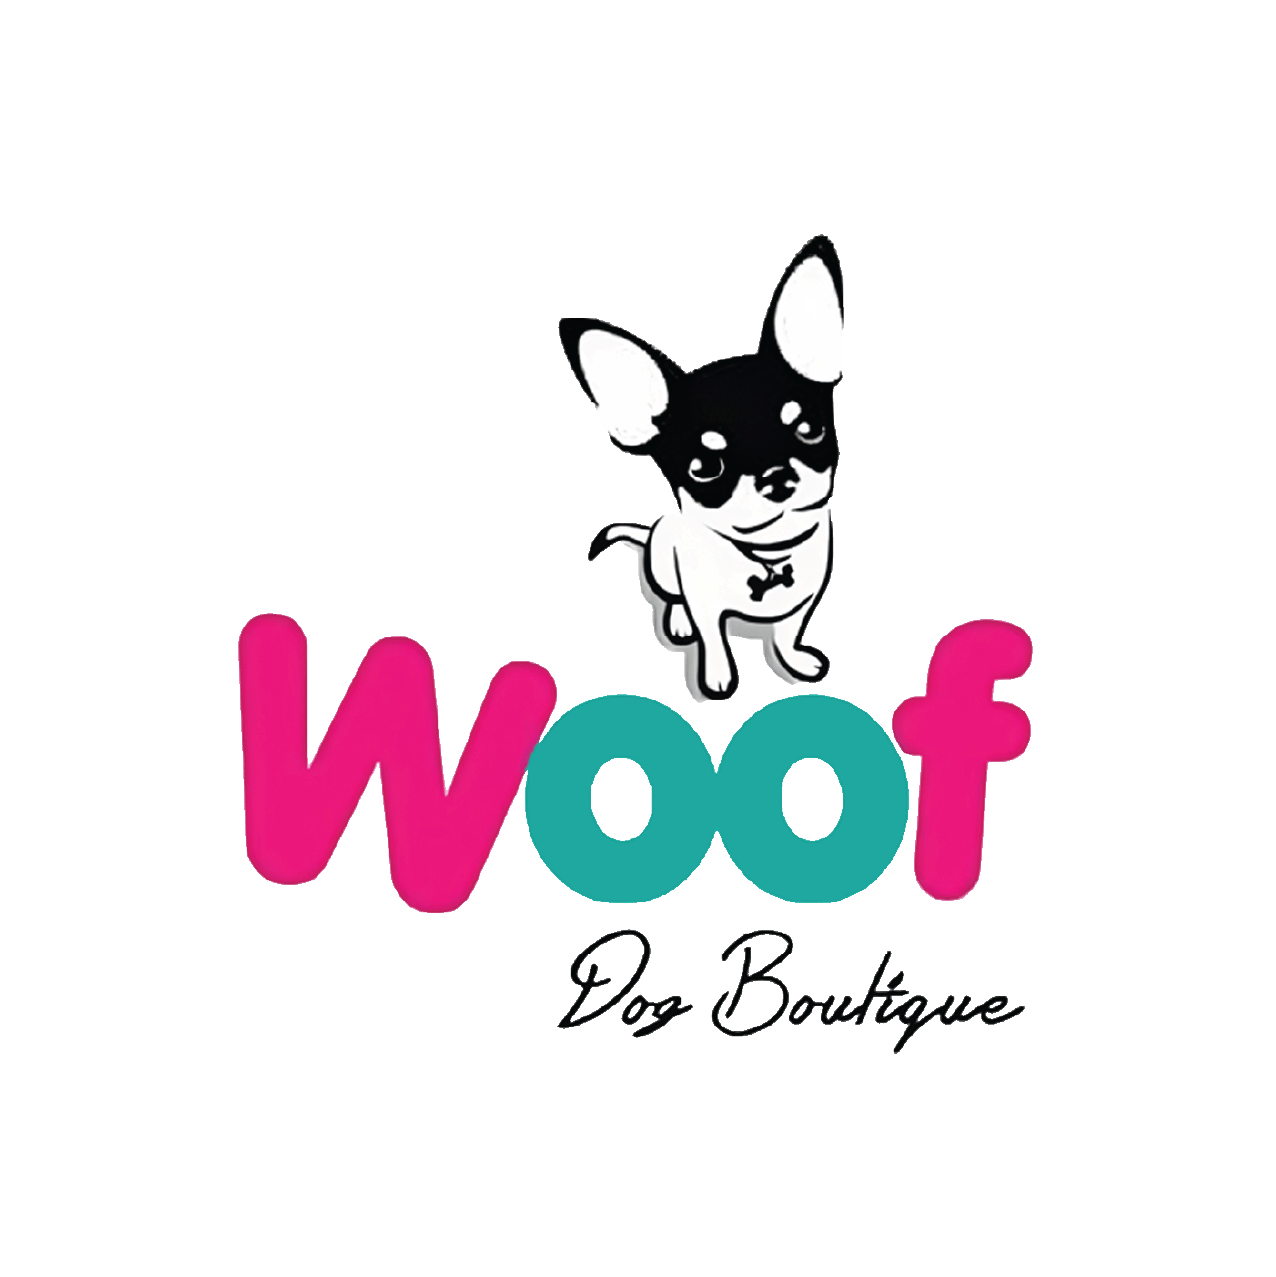 Woof Dog Boutique